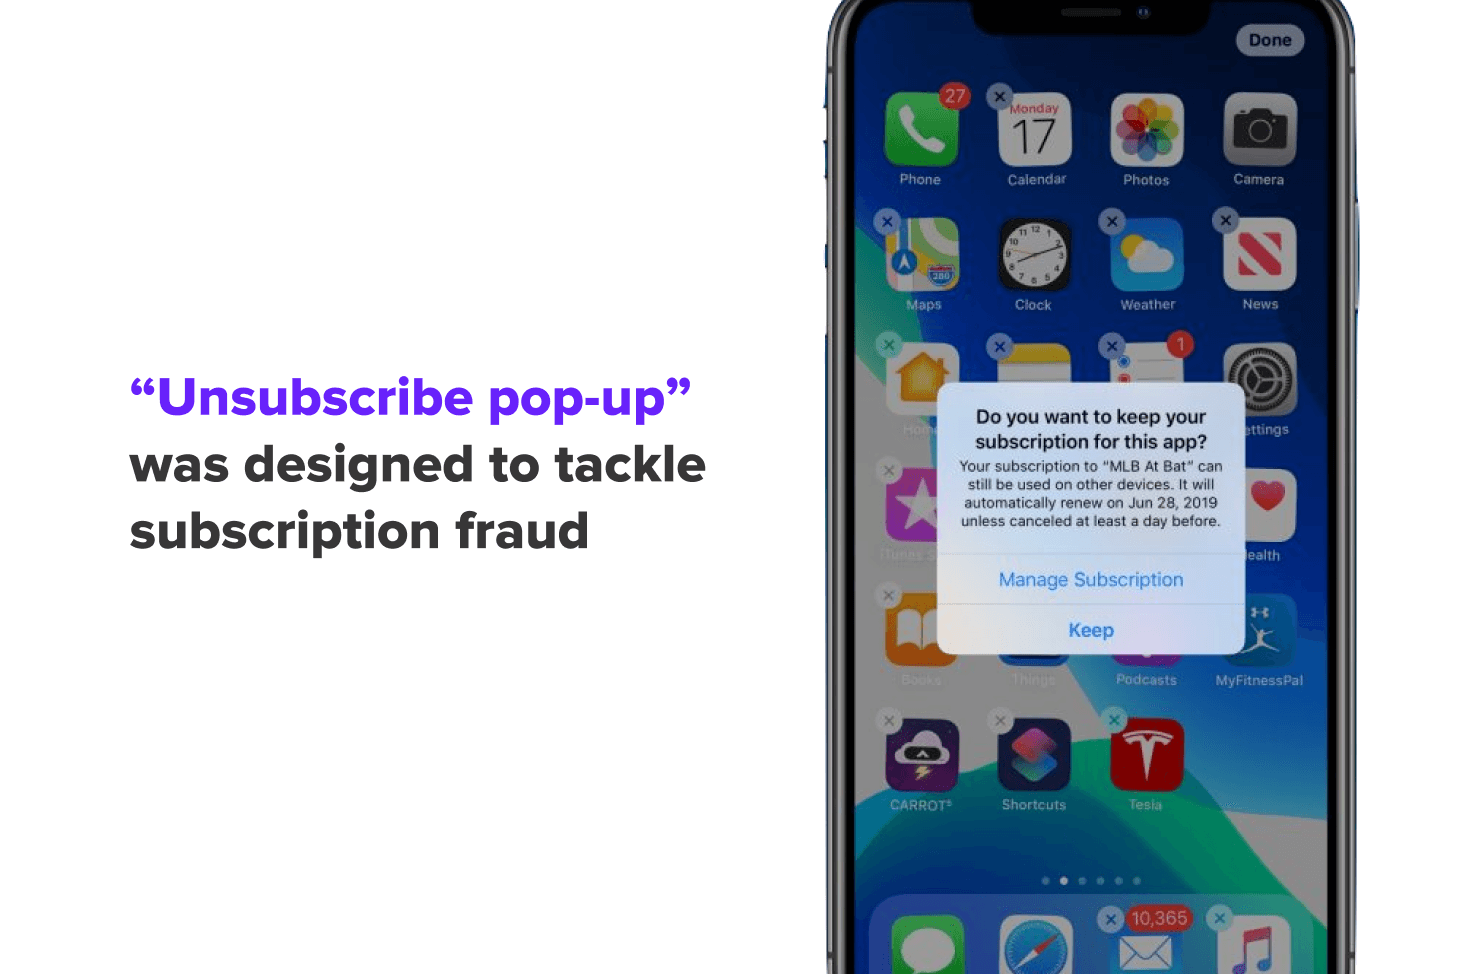 Unsubscribe pop-up on iOS